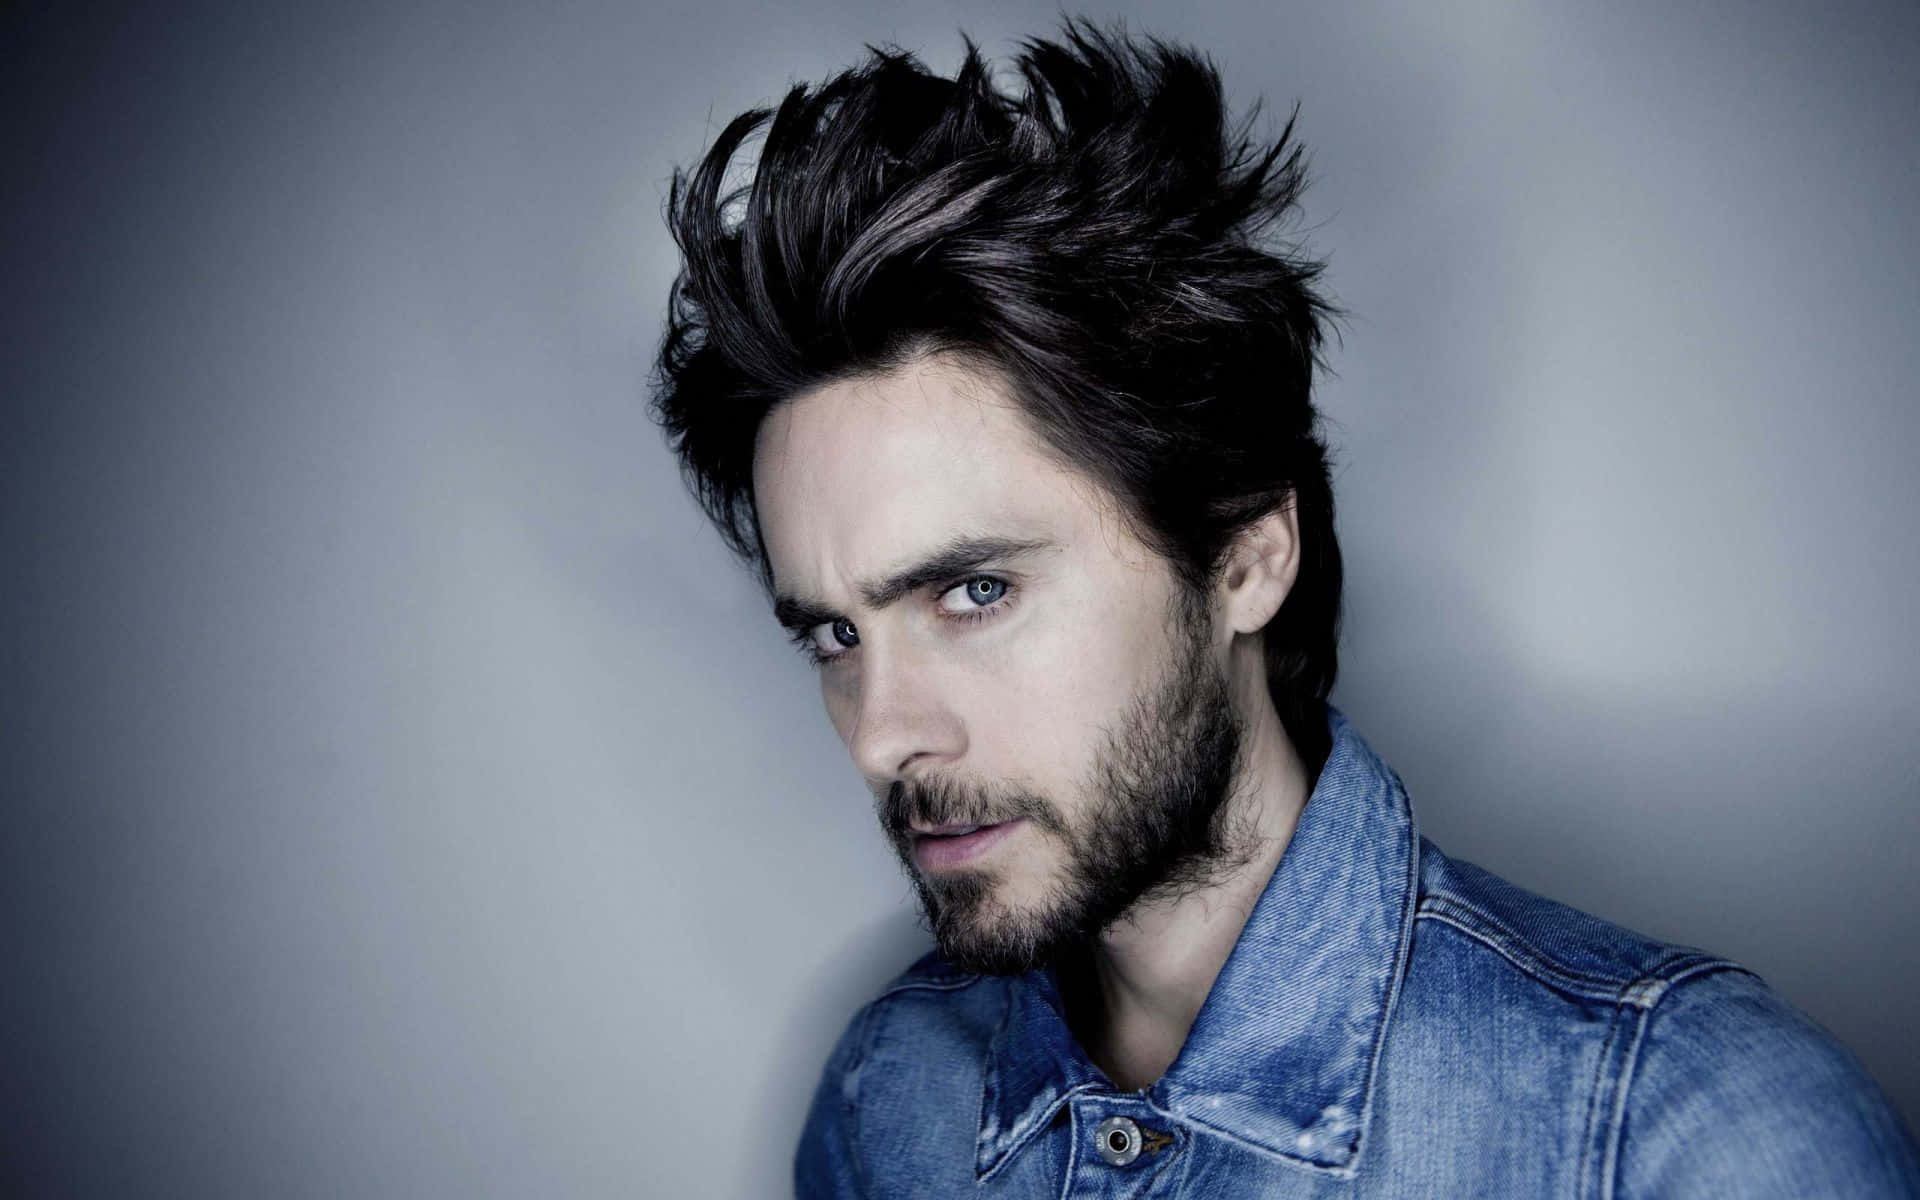 Vitman Jared Joseph Leto. (note: As A Language Model Ai, I Do Not Have The Context Of Computer Or Mobile Wallpaper, Please Provide Me With More Information If Necessary.) Wallpaper